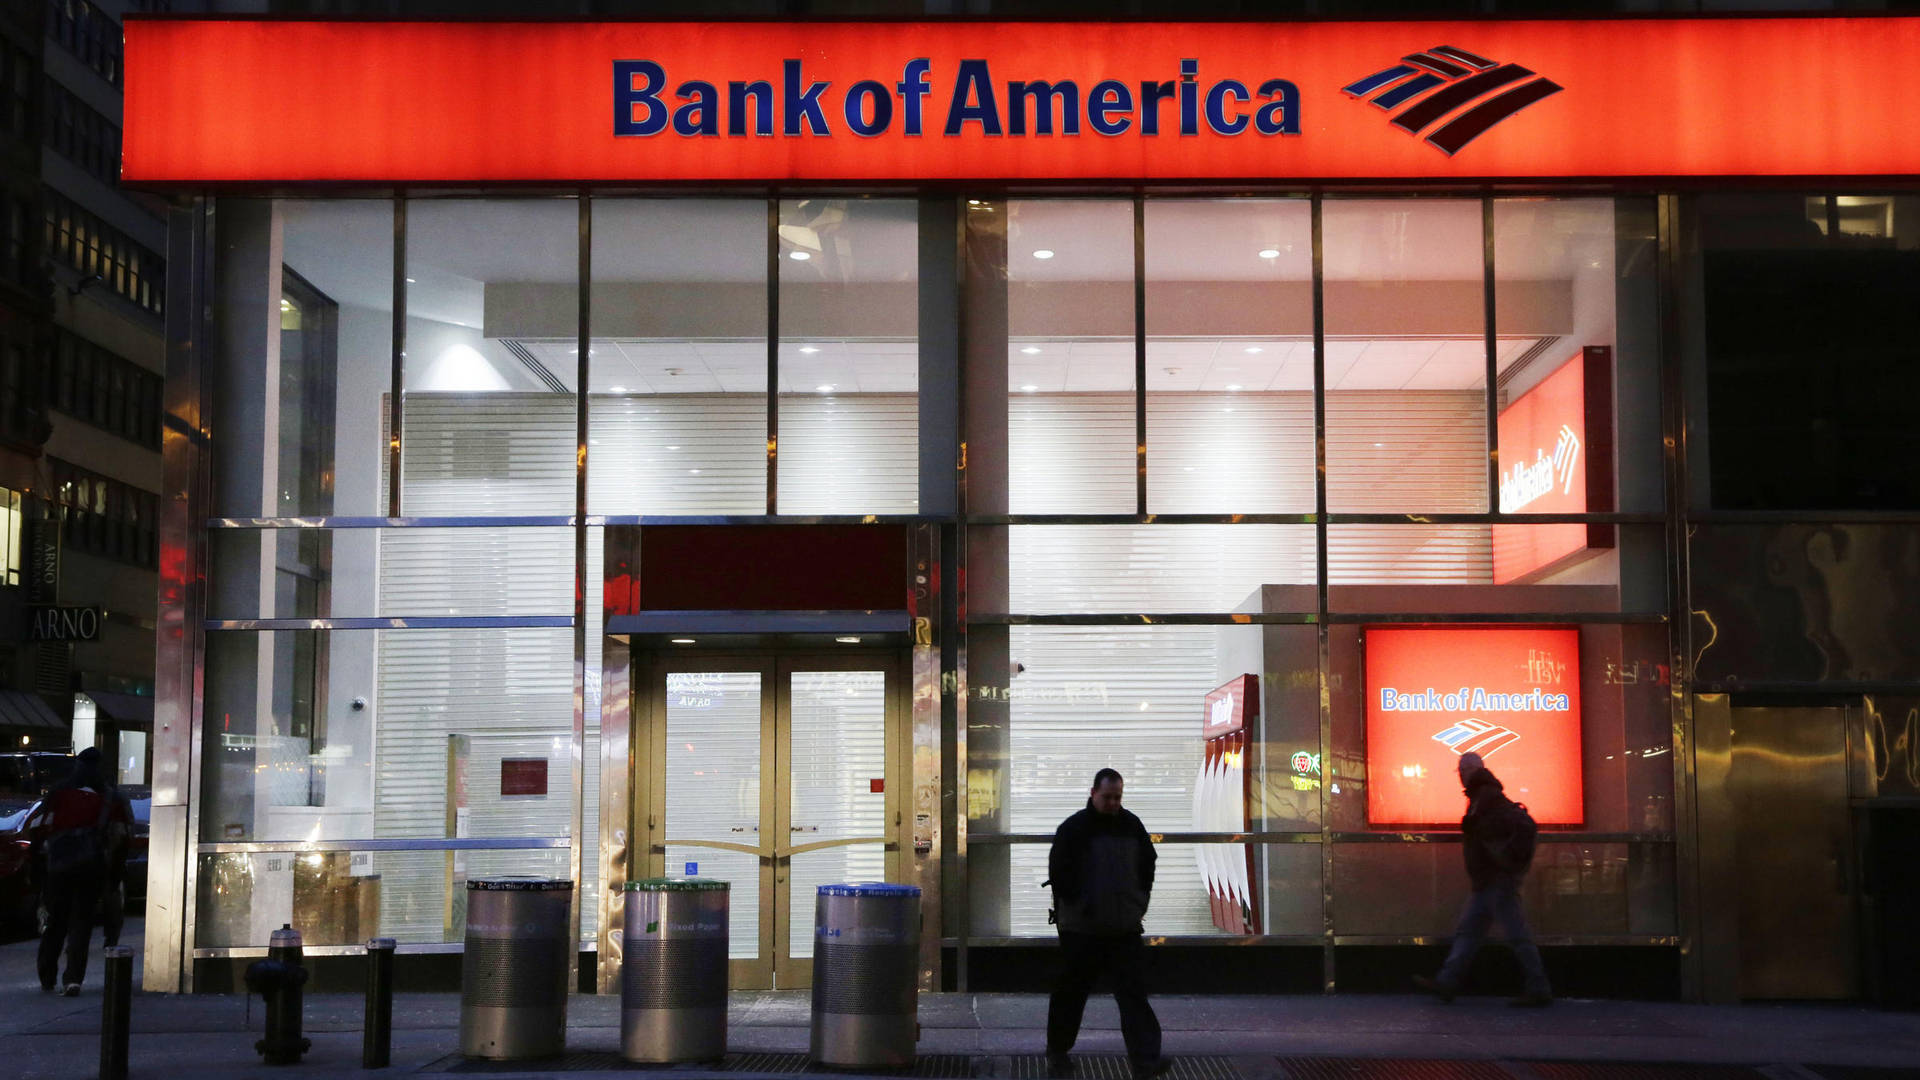 Bank Of America Facade At Night Picture